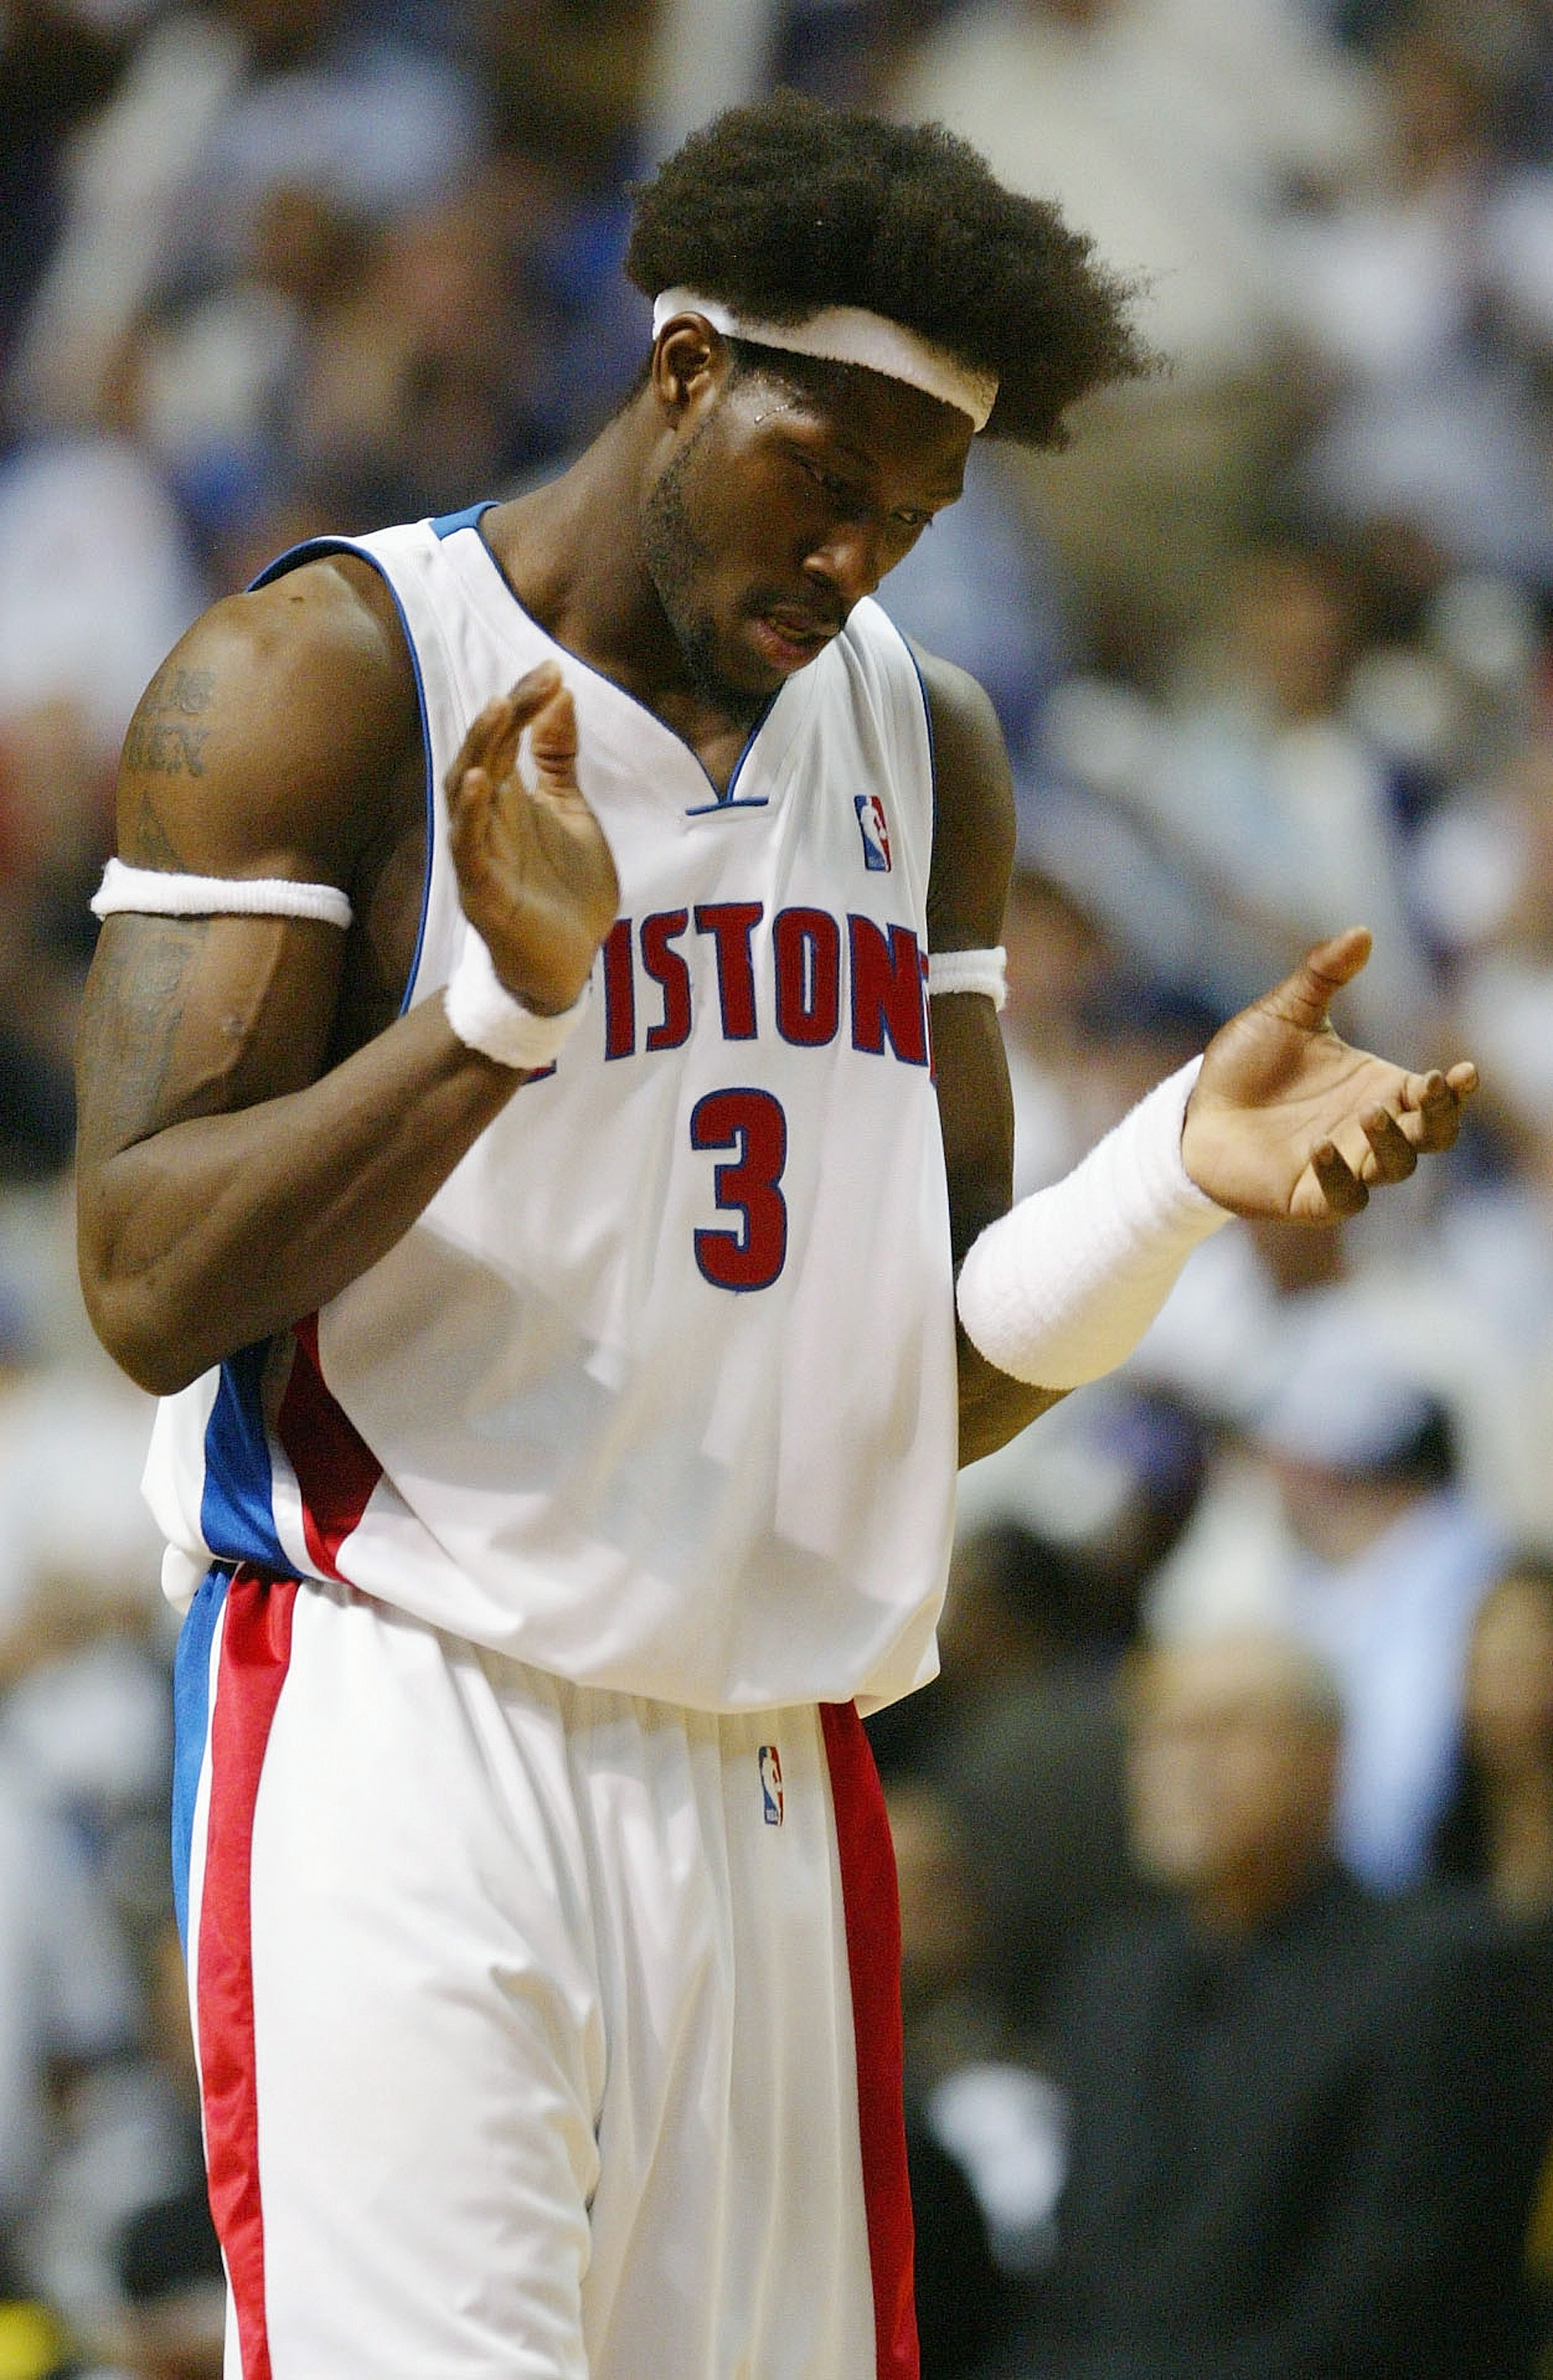 AUBURN HILLS, MI - JUNE 13:  Ben Wallace #3 of the Detroit Pistons celebrates after defeating the Los Angeles Lakers 88-80 in Game Four of the 2004 NBA Finals on June 13, 2004 at The Palace of Auburn Hills in Auburn Hills, Michigan.  NOTE TO USER: User ex